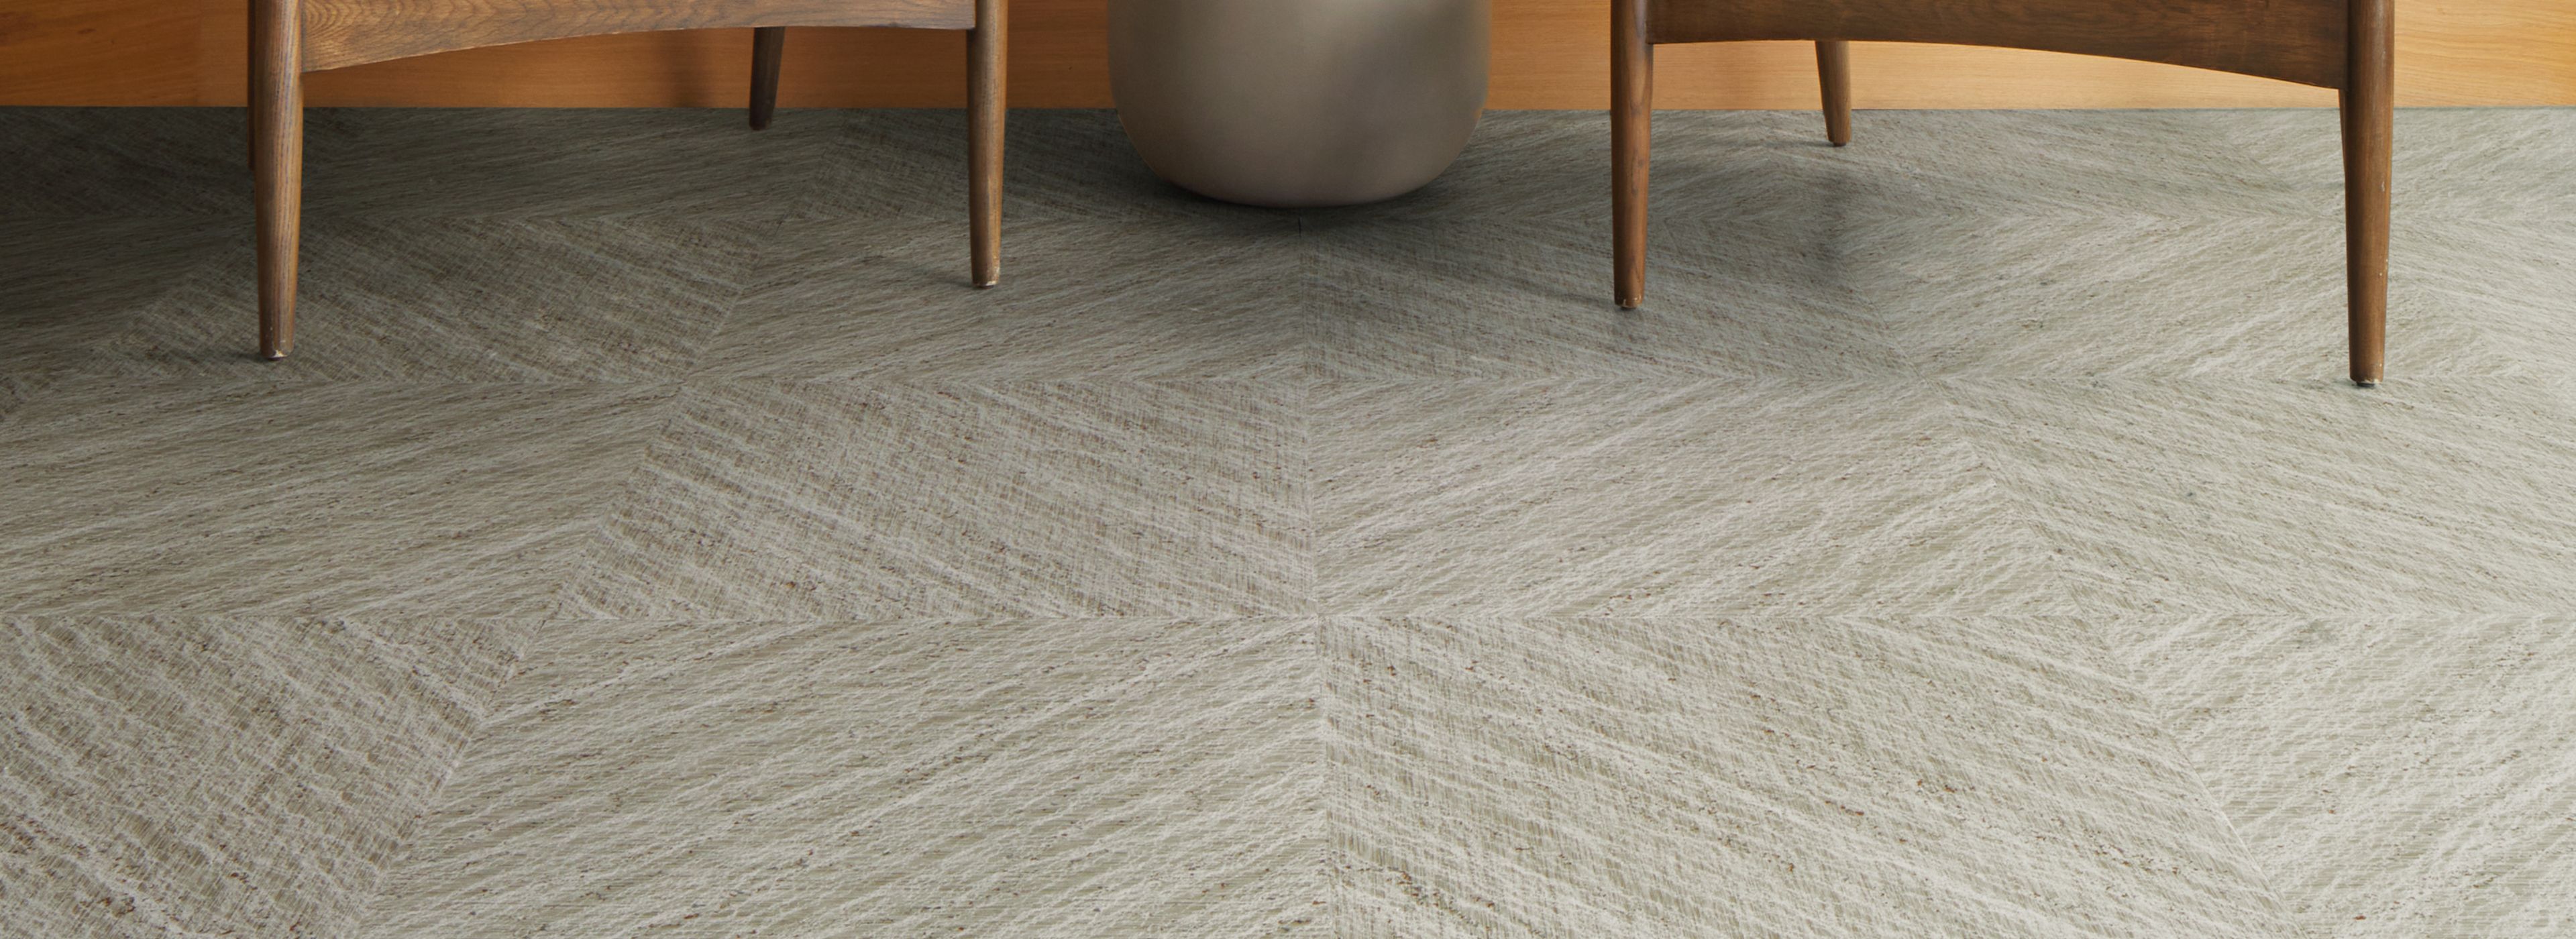 Interface Ridge LVT in Agate shown in a casual seating area imagen número 1